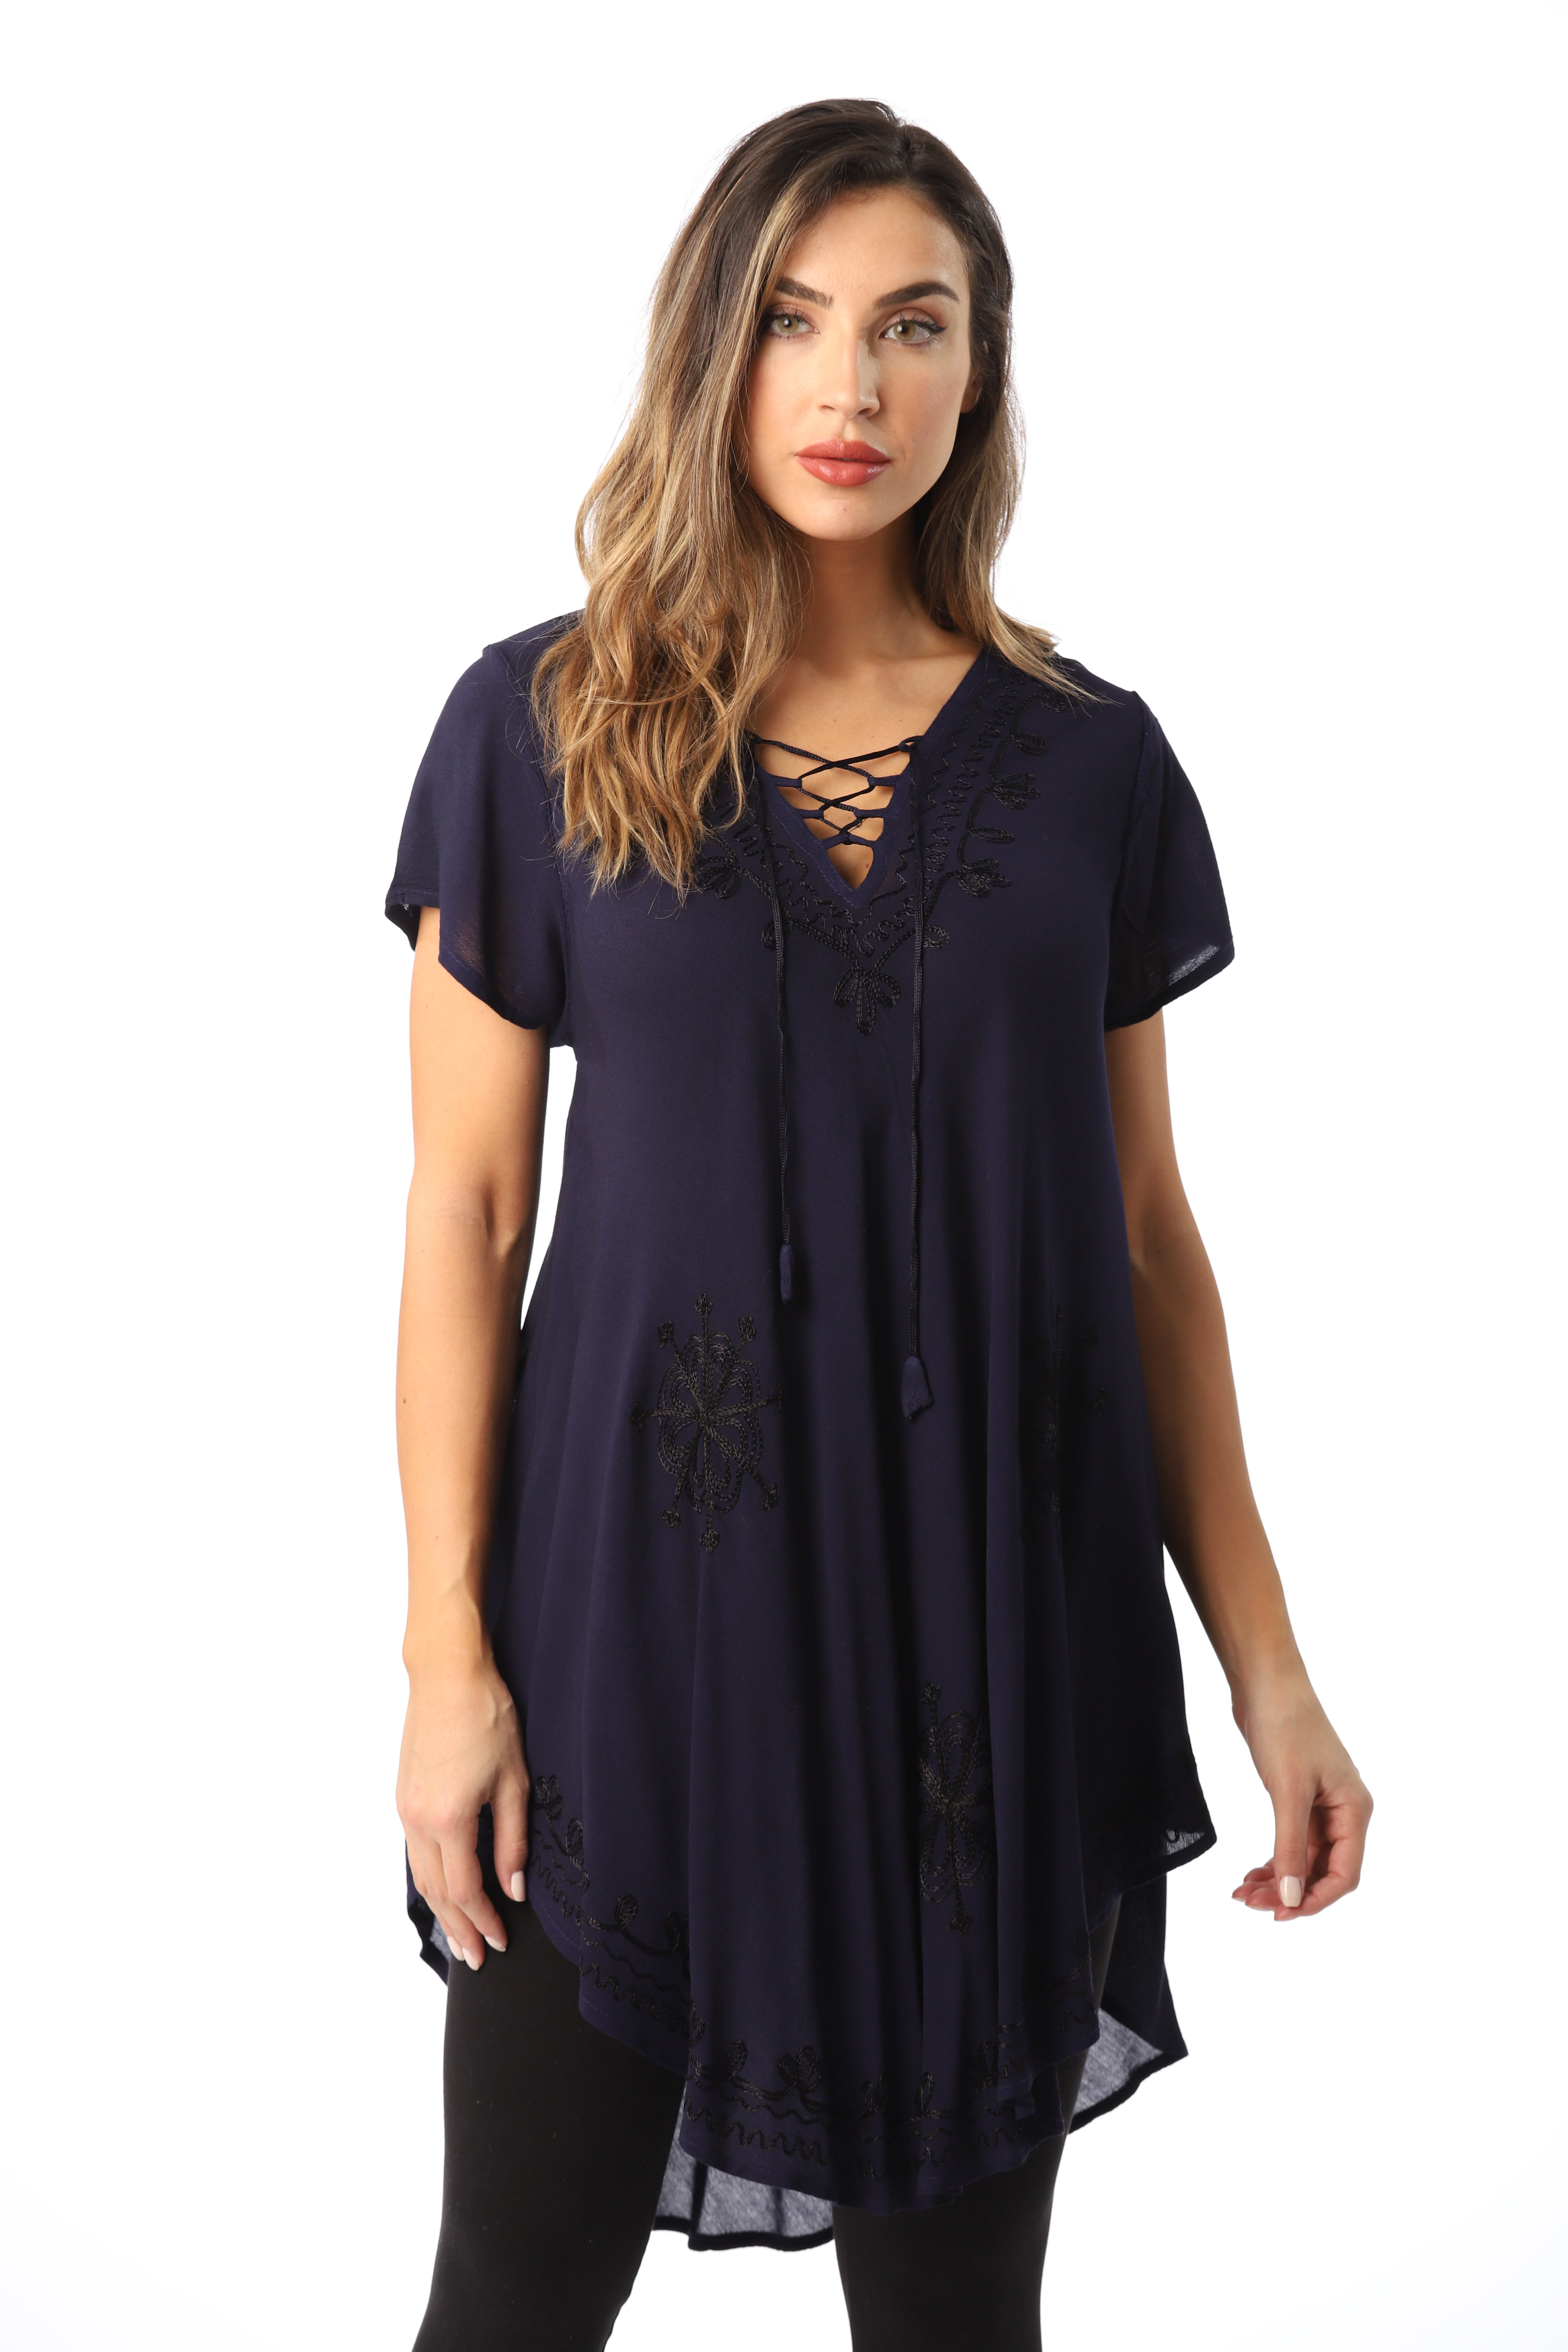 Riviera Sun Lace-Up Casual Tunic Top with Embroidery (Navy, Medium ...